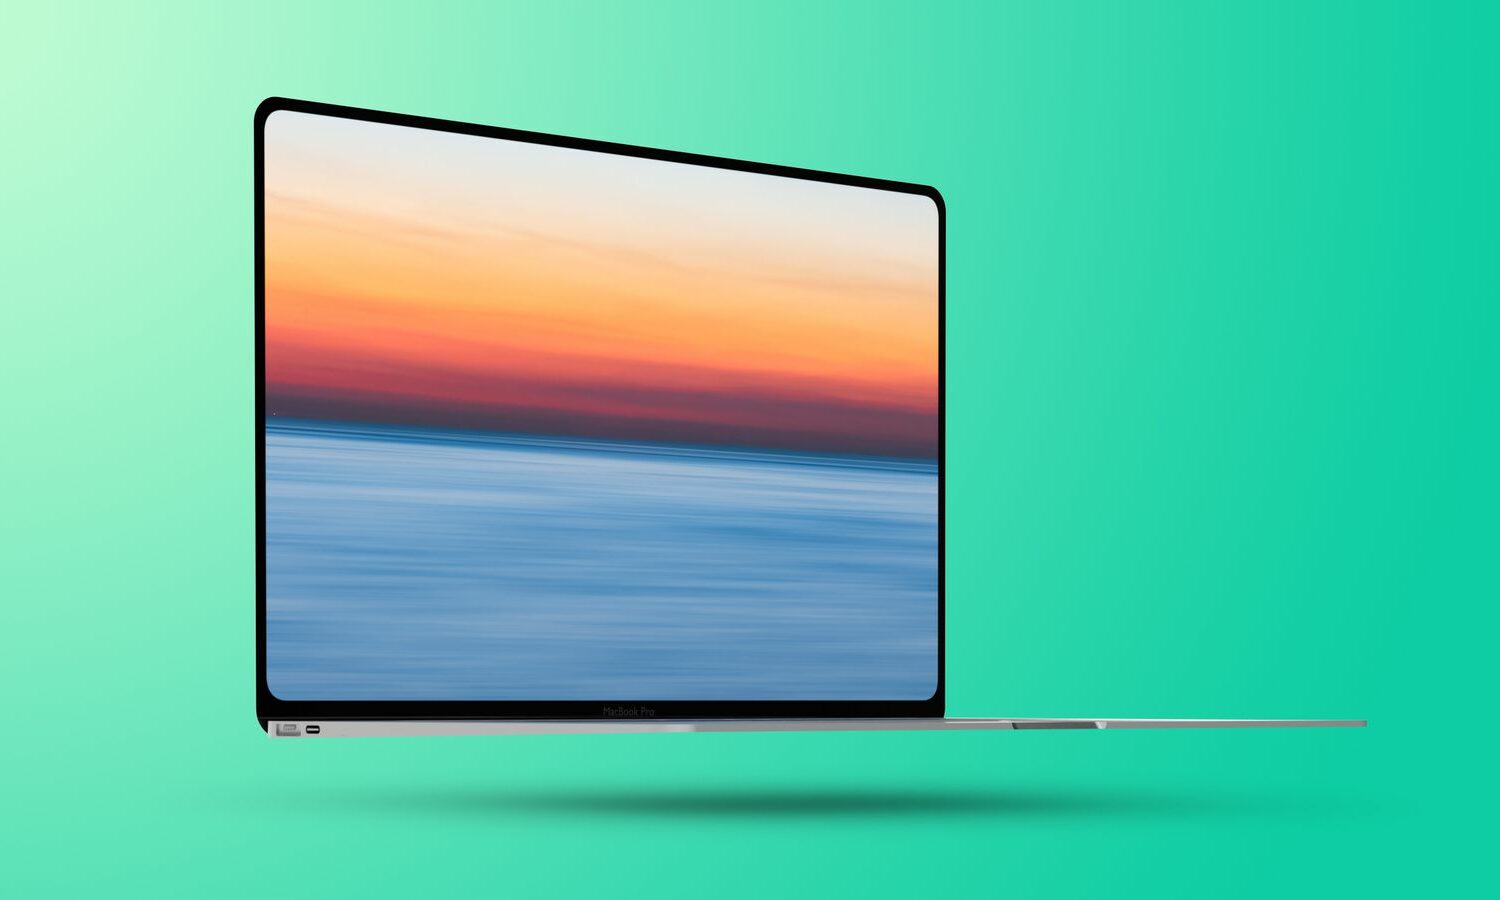 A mockup of a 2022 MacBook Air with a notched display, set against a green gradient background